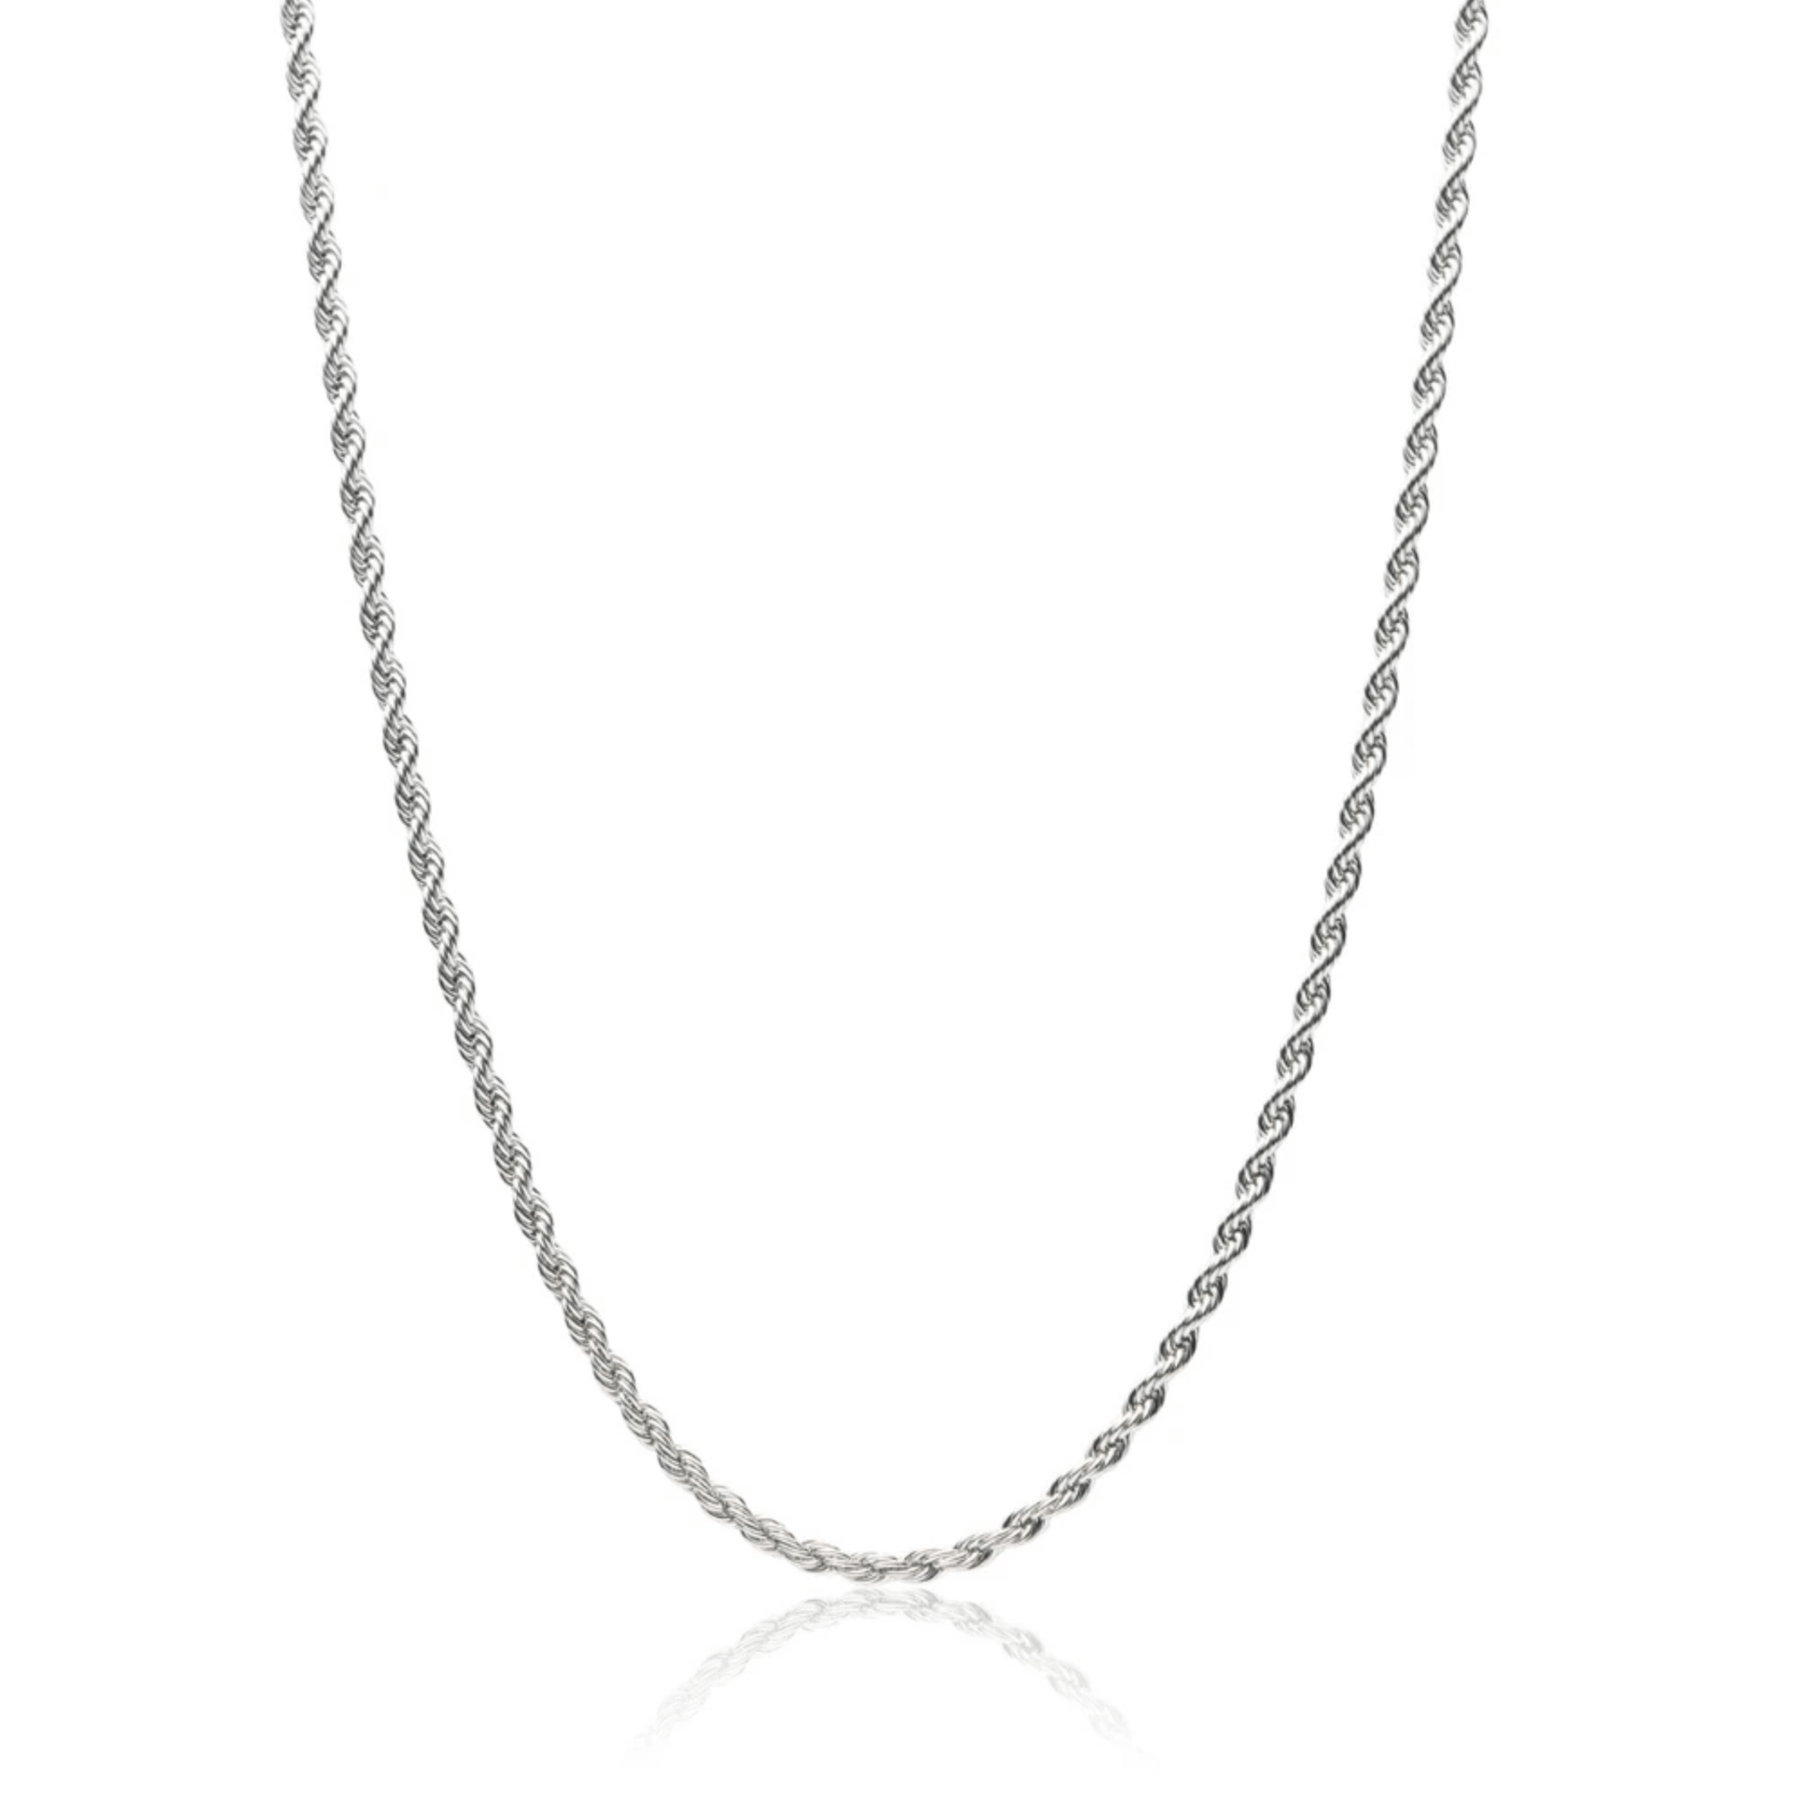 SILVER ROPE CHAIN (4MM)